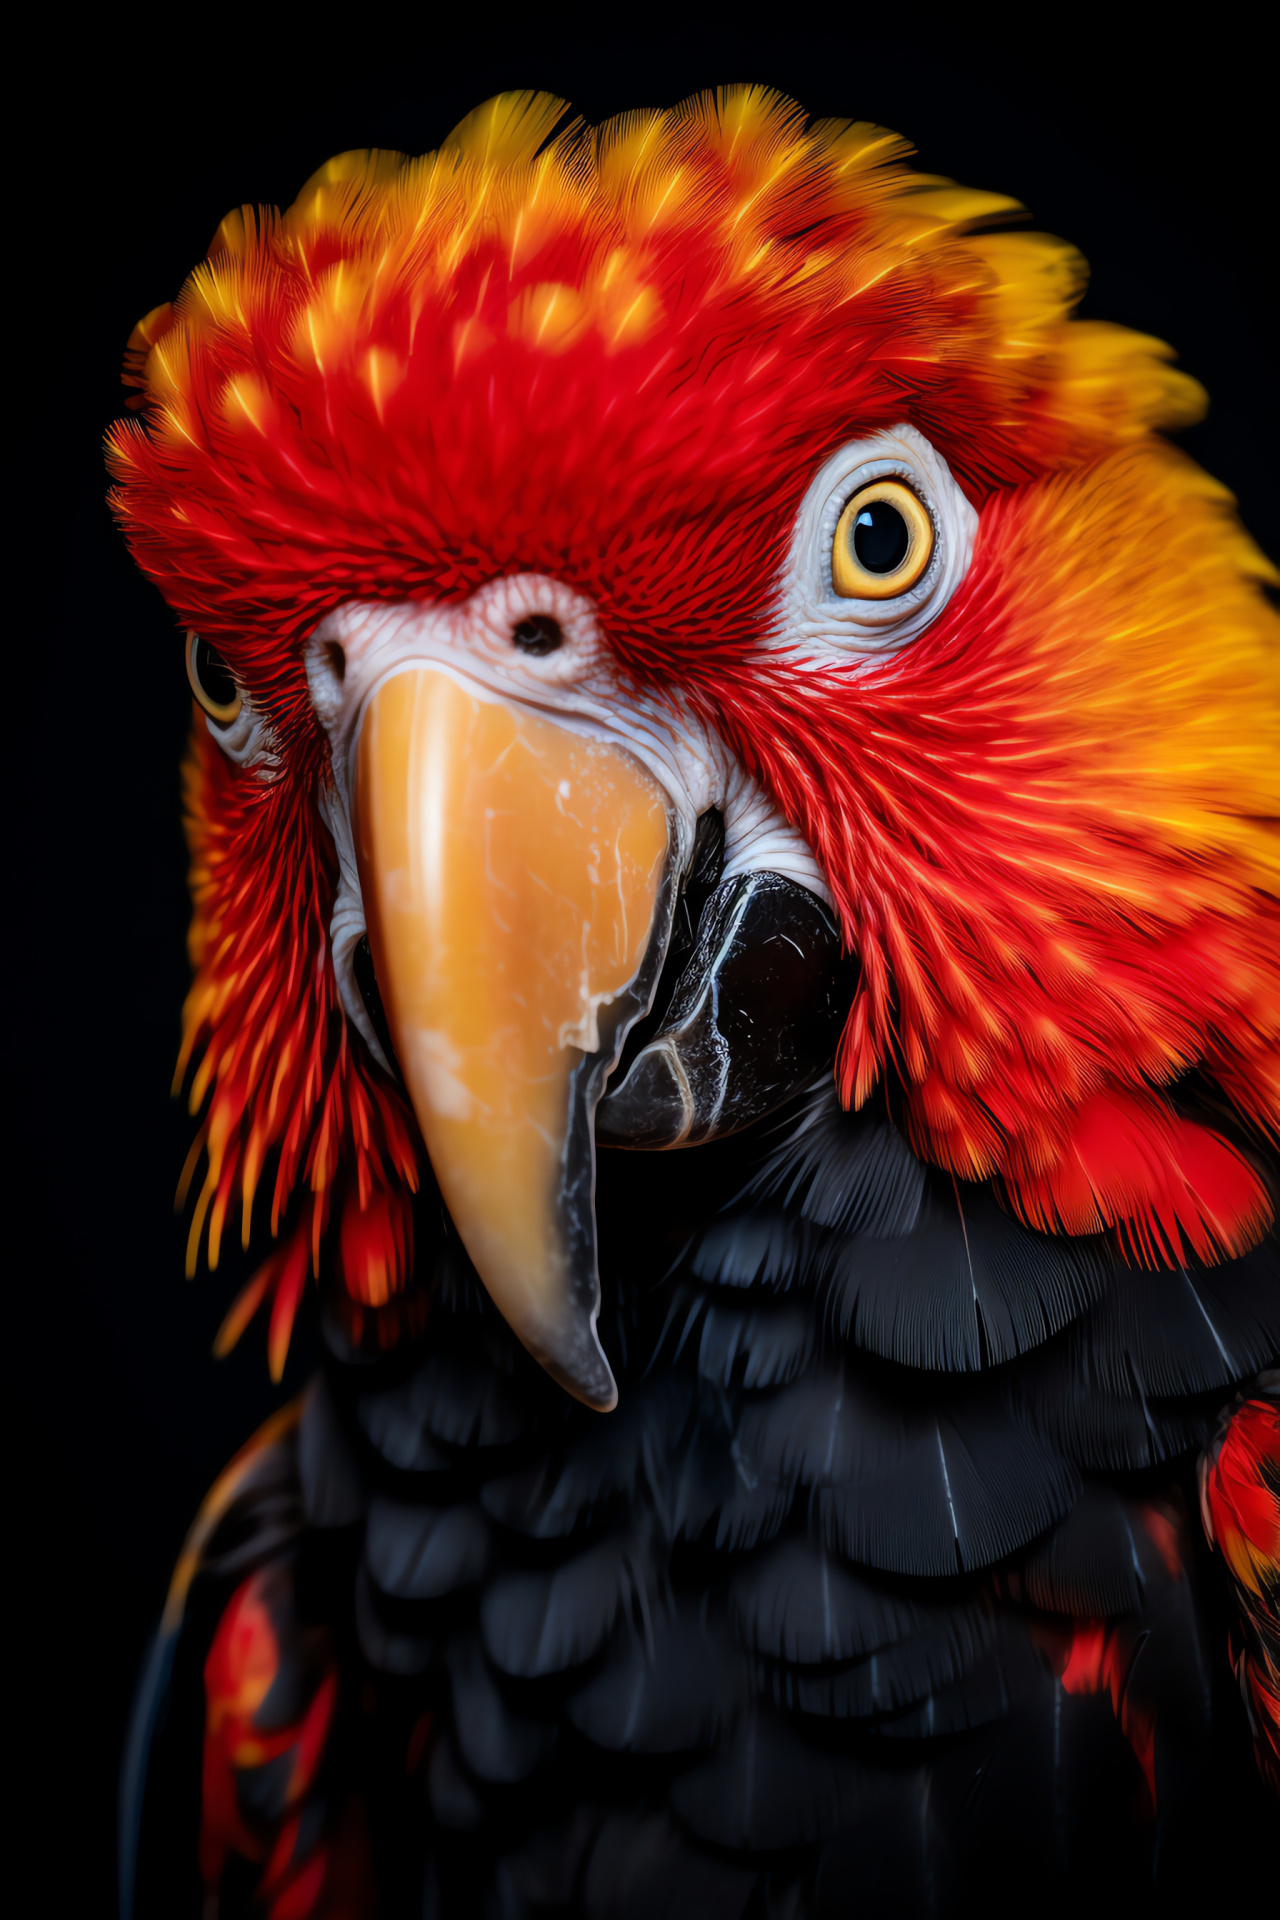 Red-yellow Parrot, Avian portrait, Black backdrop contrast, Bird posture, Exotic feathers, HD Phone Image